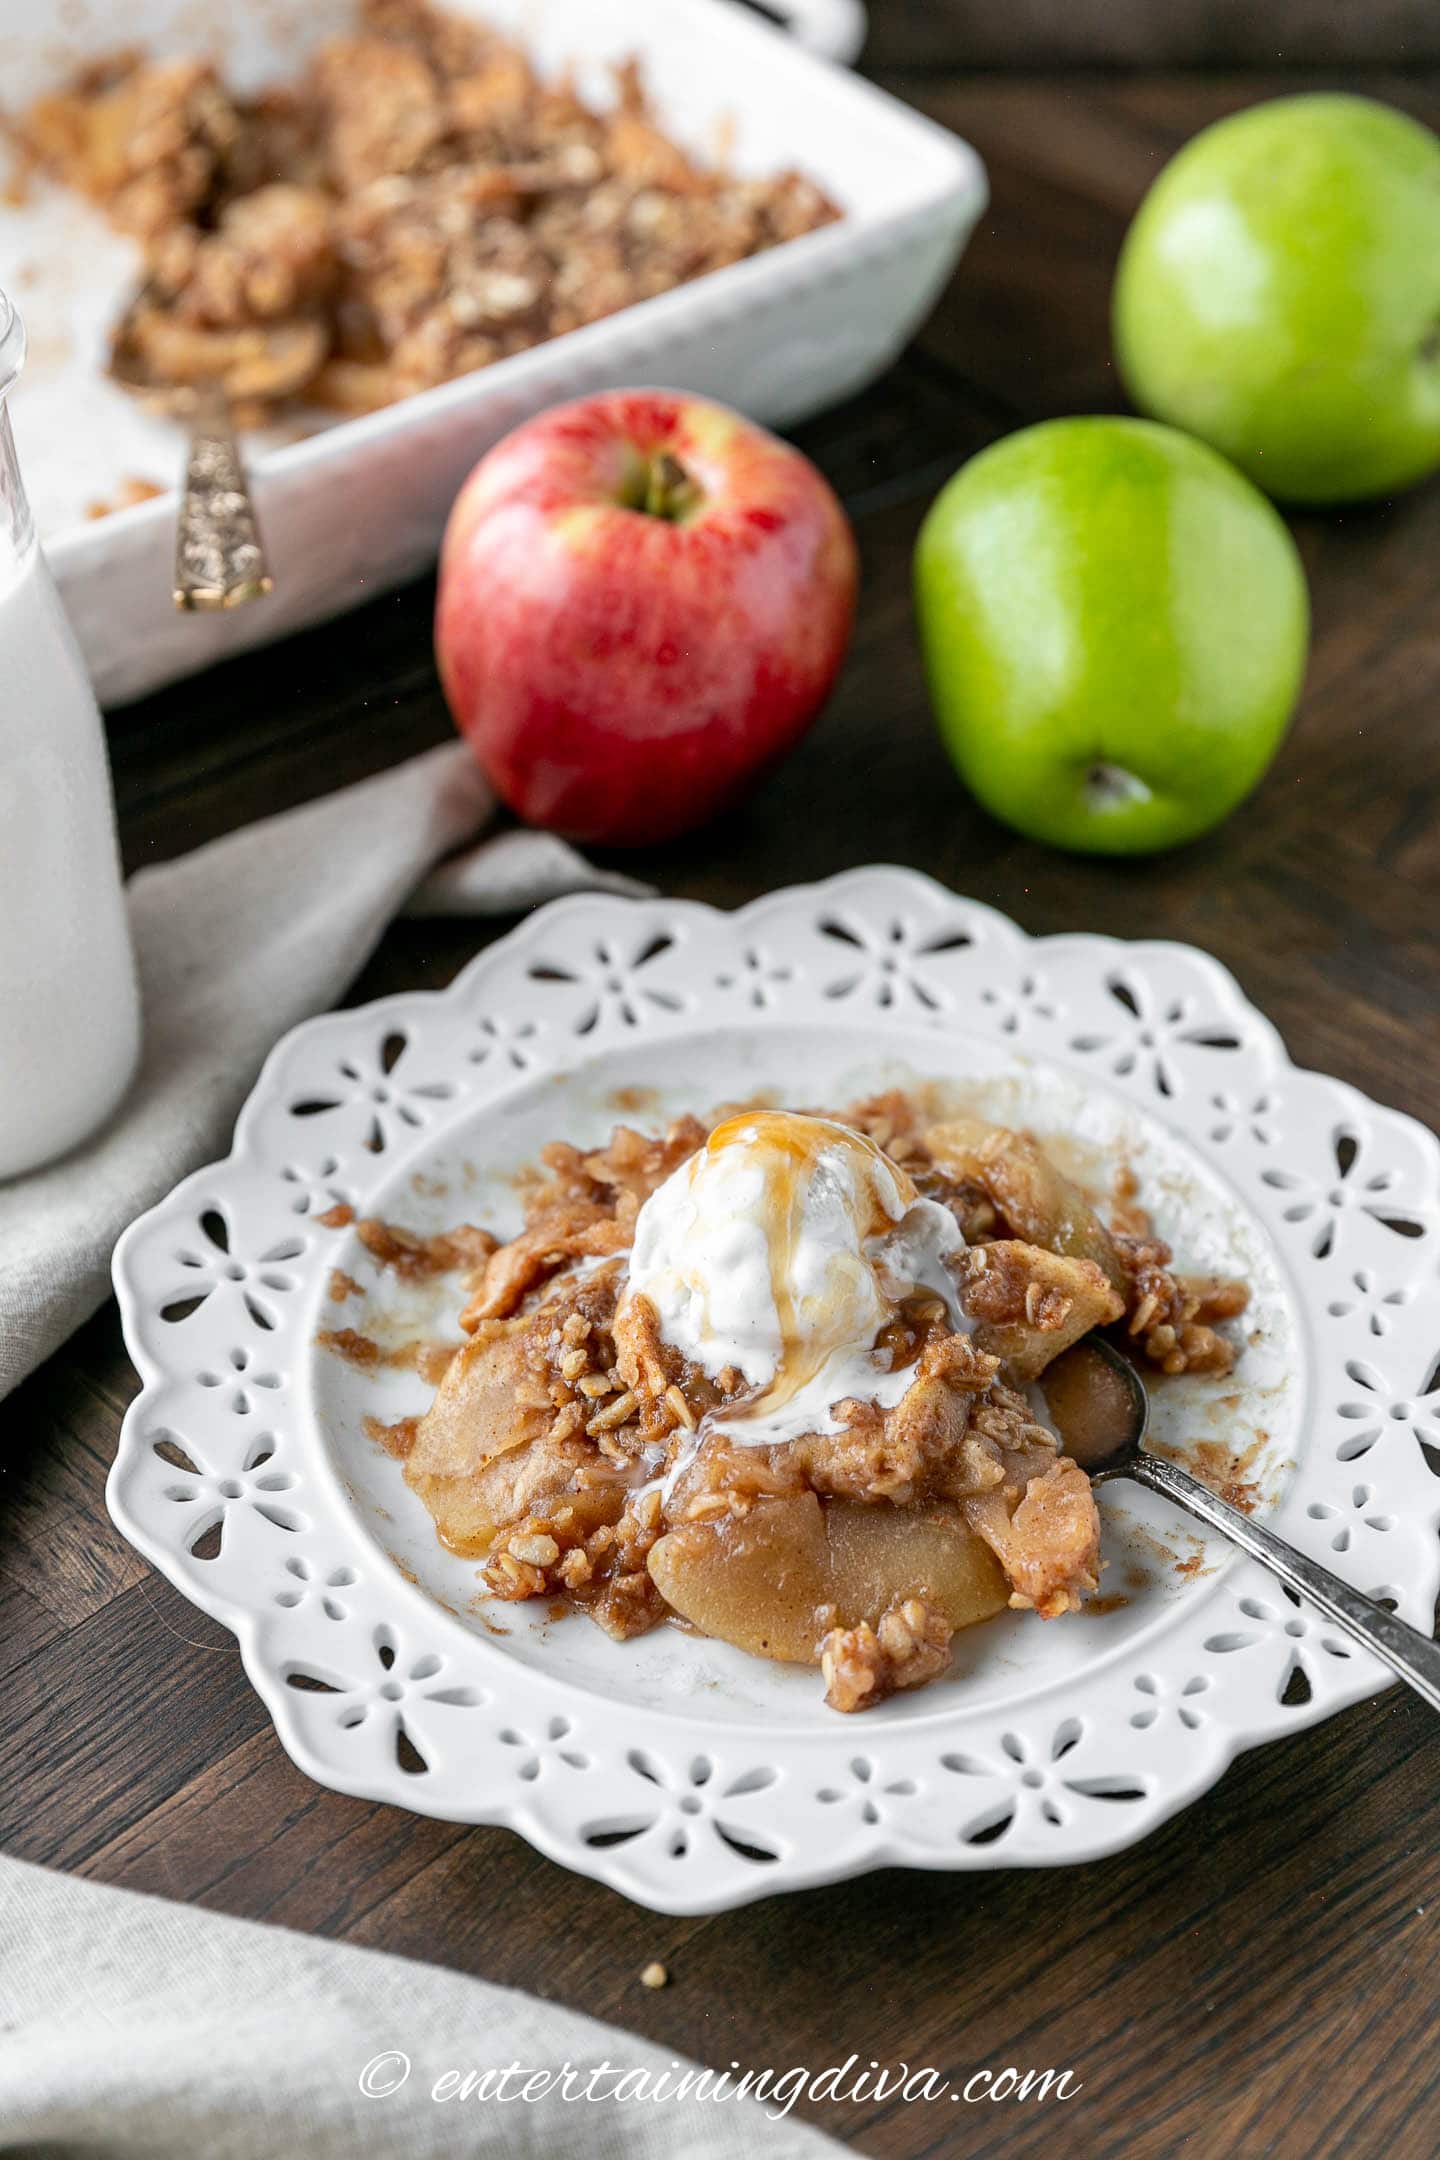 Apple oat crisp topped with vanilla ice cream and caramel sauce in front of some apples and a baking dish of apple crisp